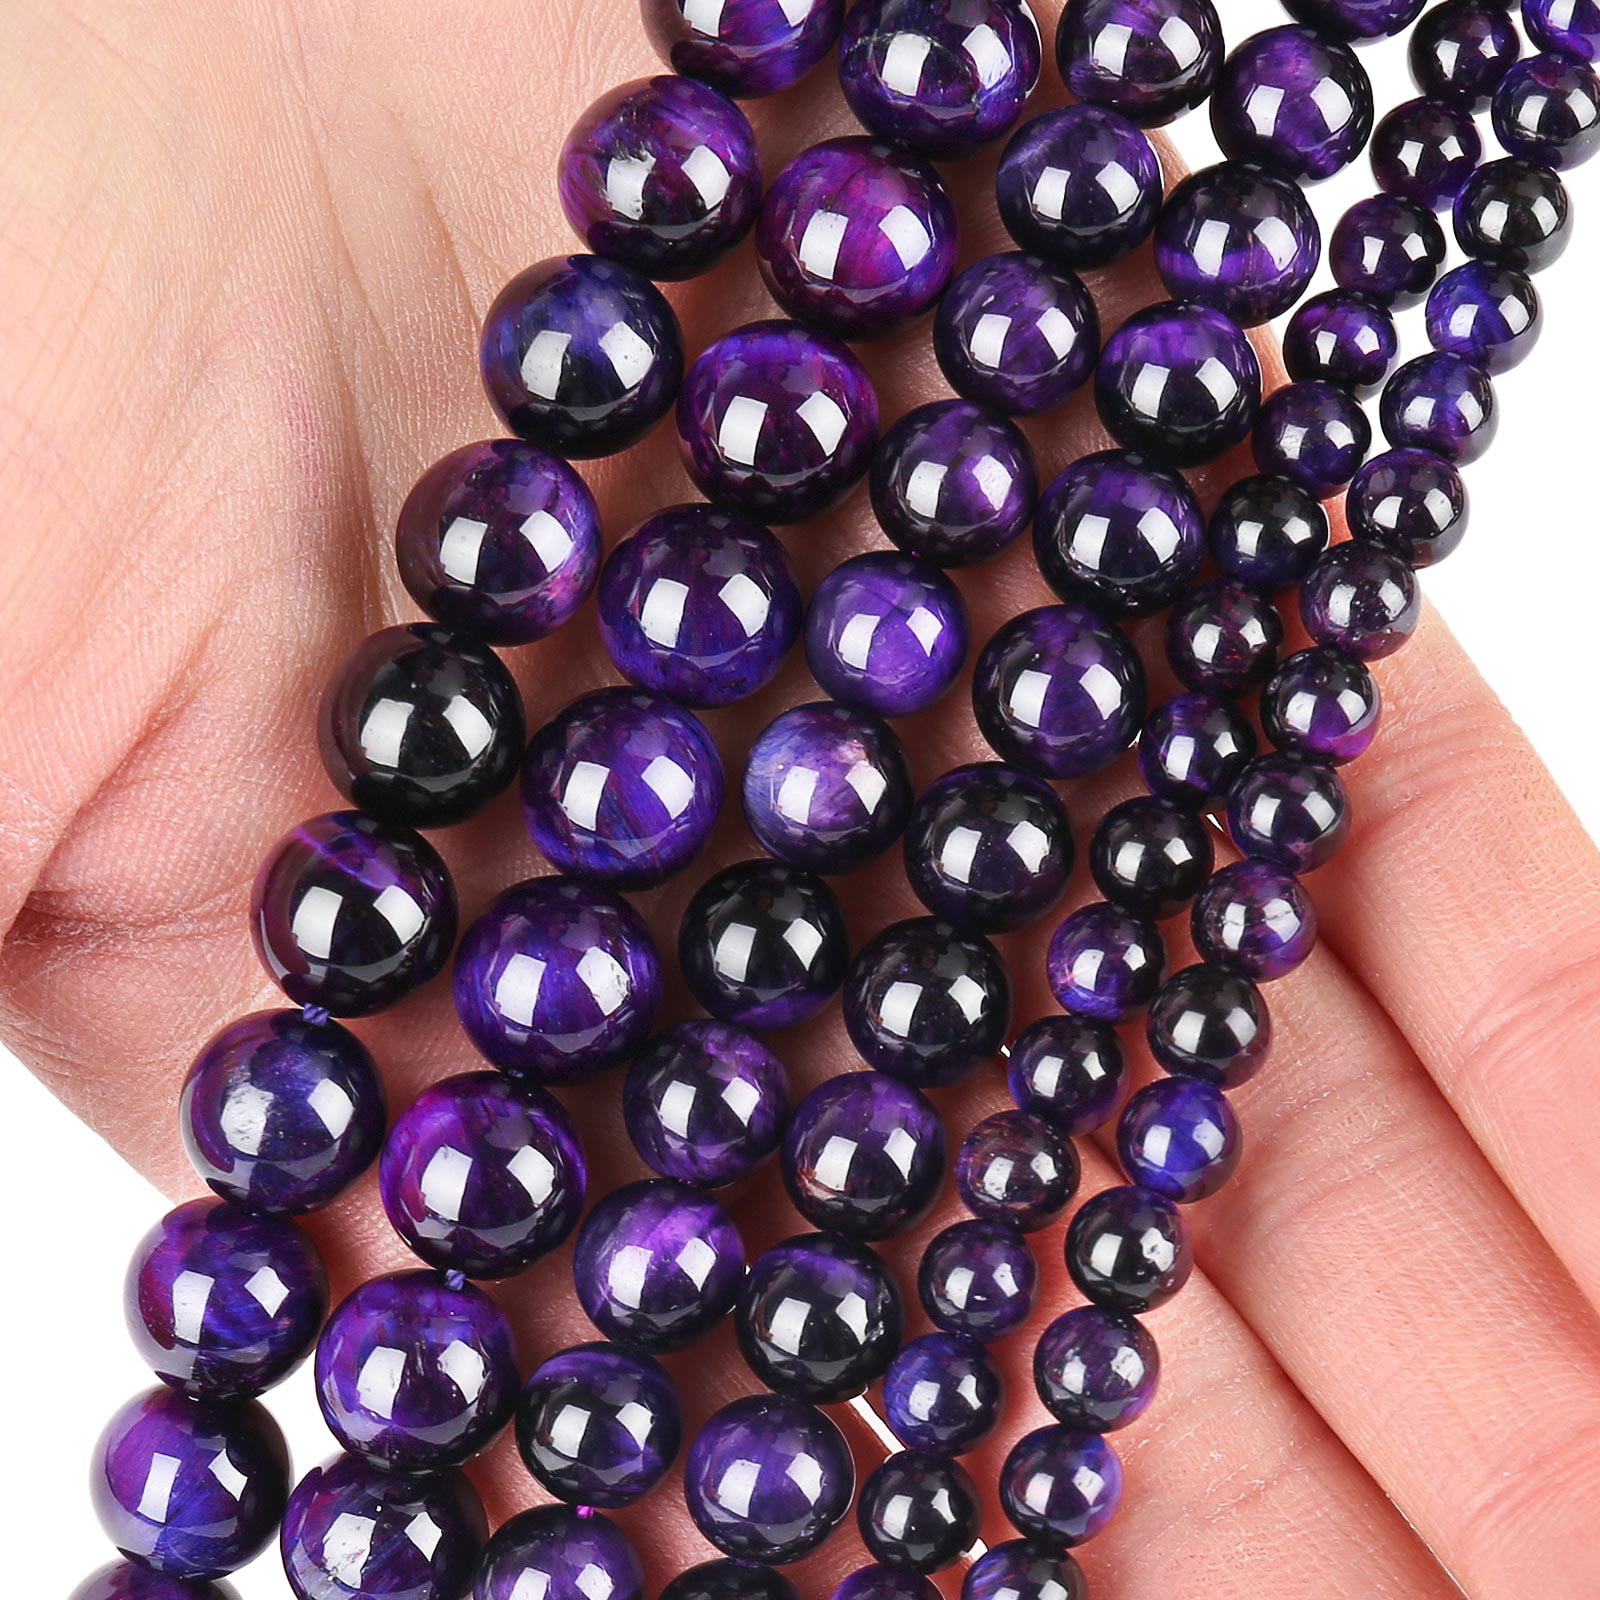 Rui Long Natural Round Amethyst Agate Loose Stone Beads Bulk for Jewelry Making 4mm 6mm 8mm 10mm 12mm (4mm)